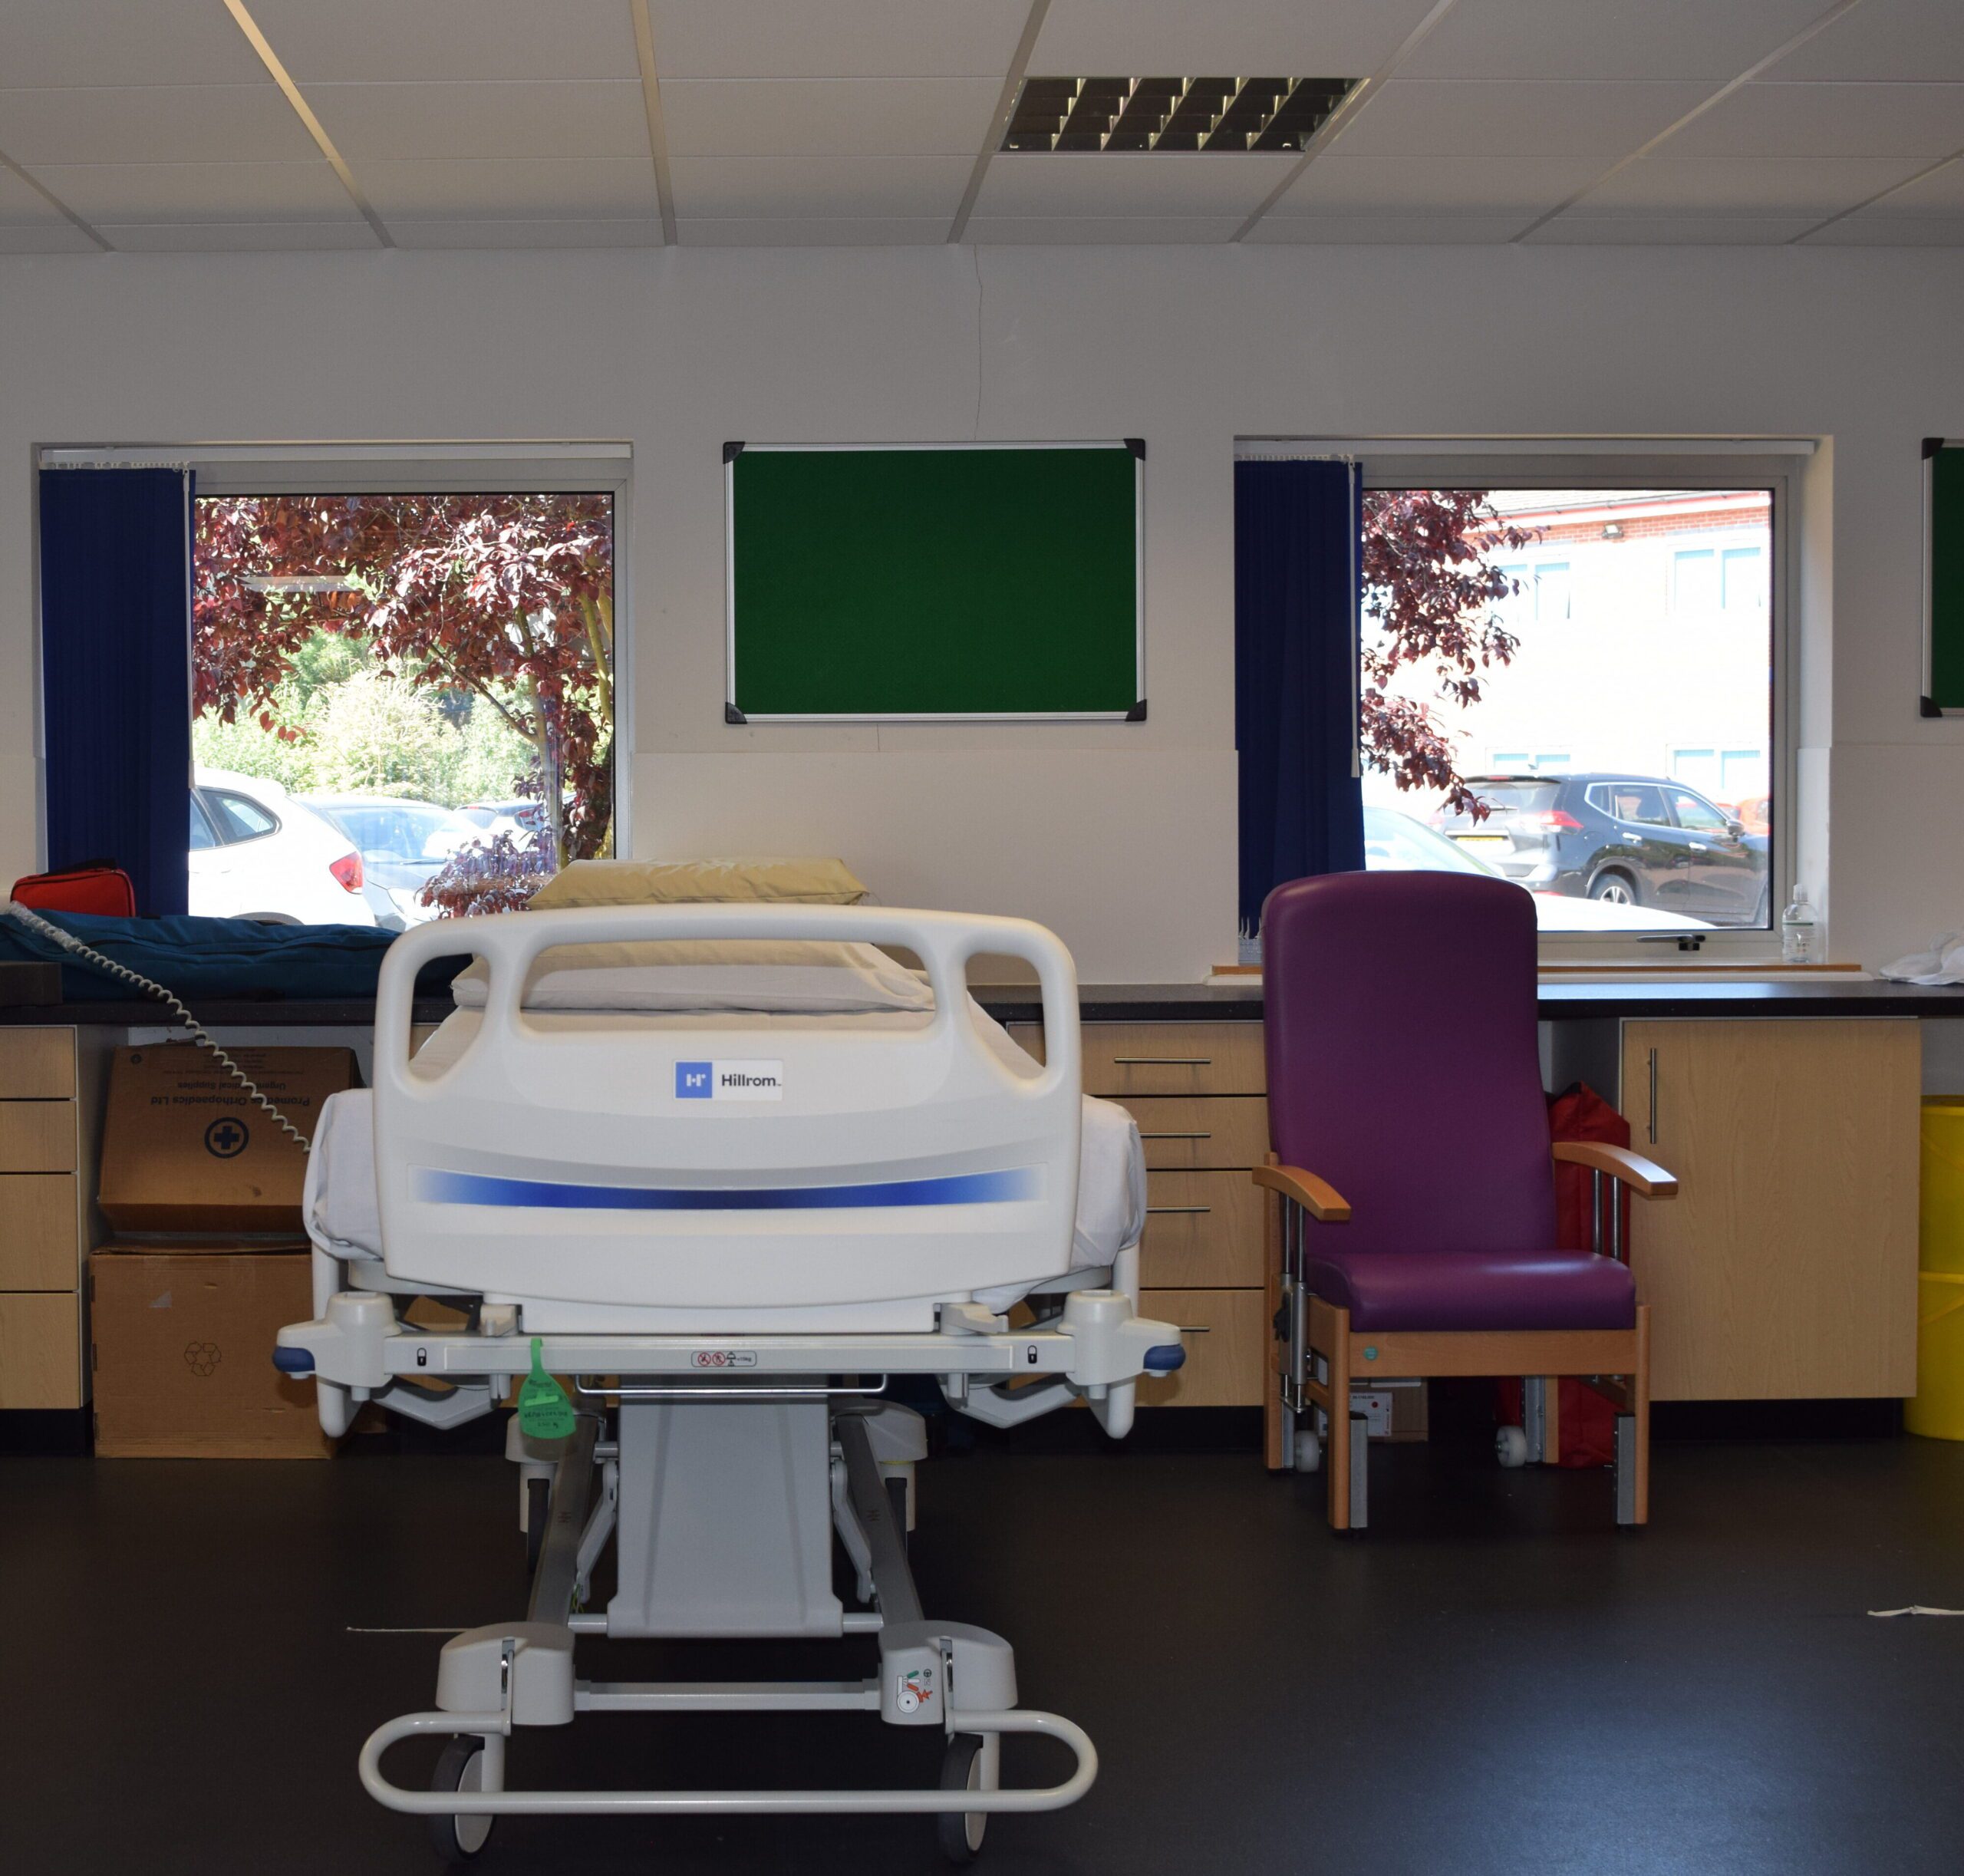 An image with a hospital bed and ergonomic chair